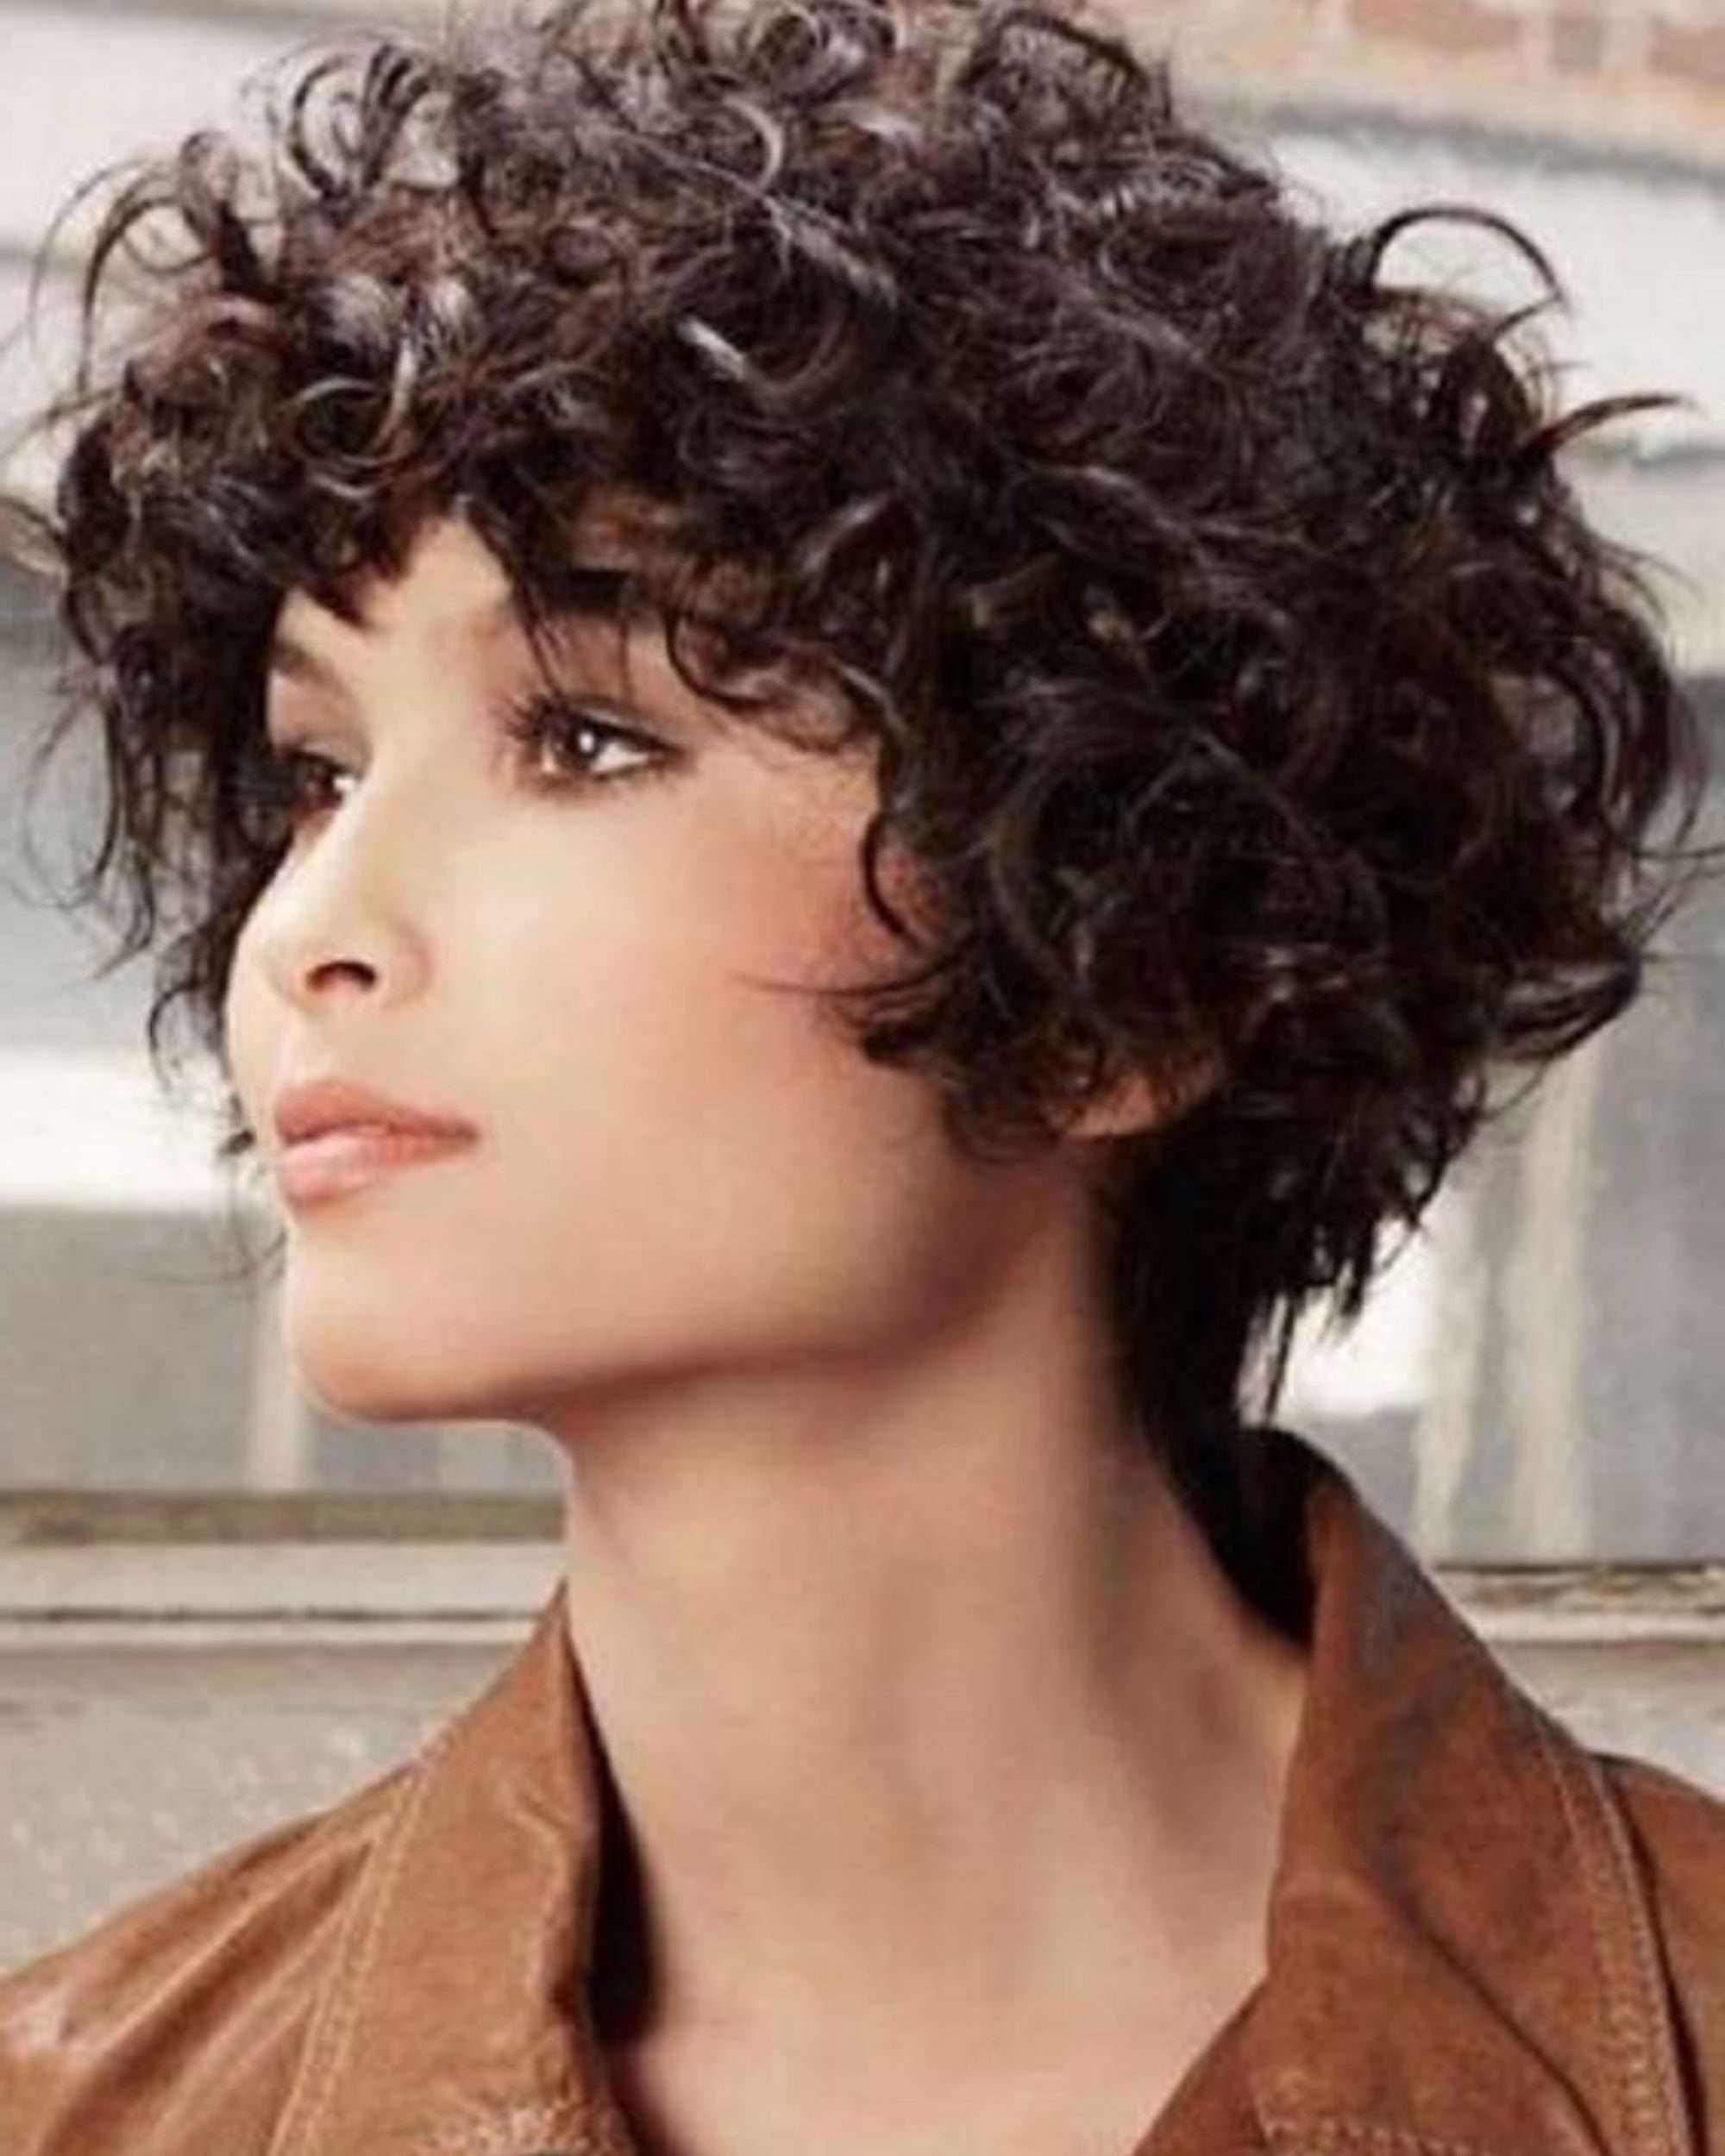 girl with short curly hair